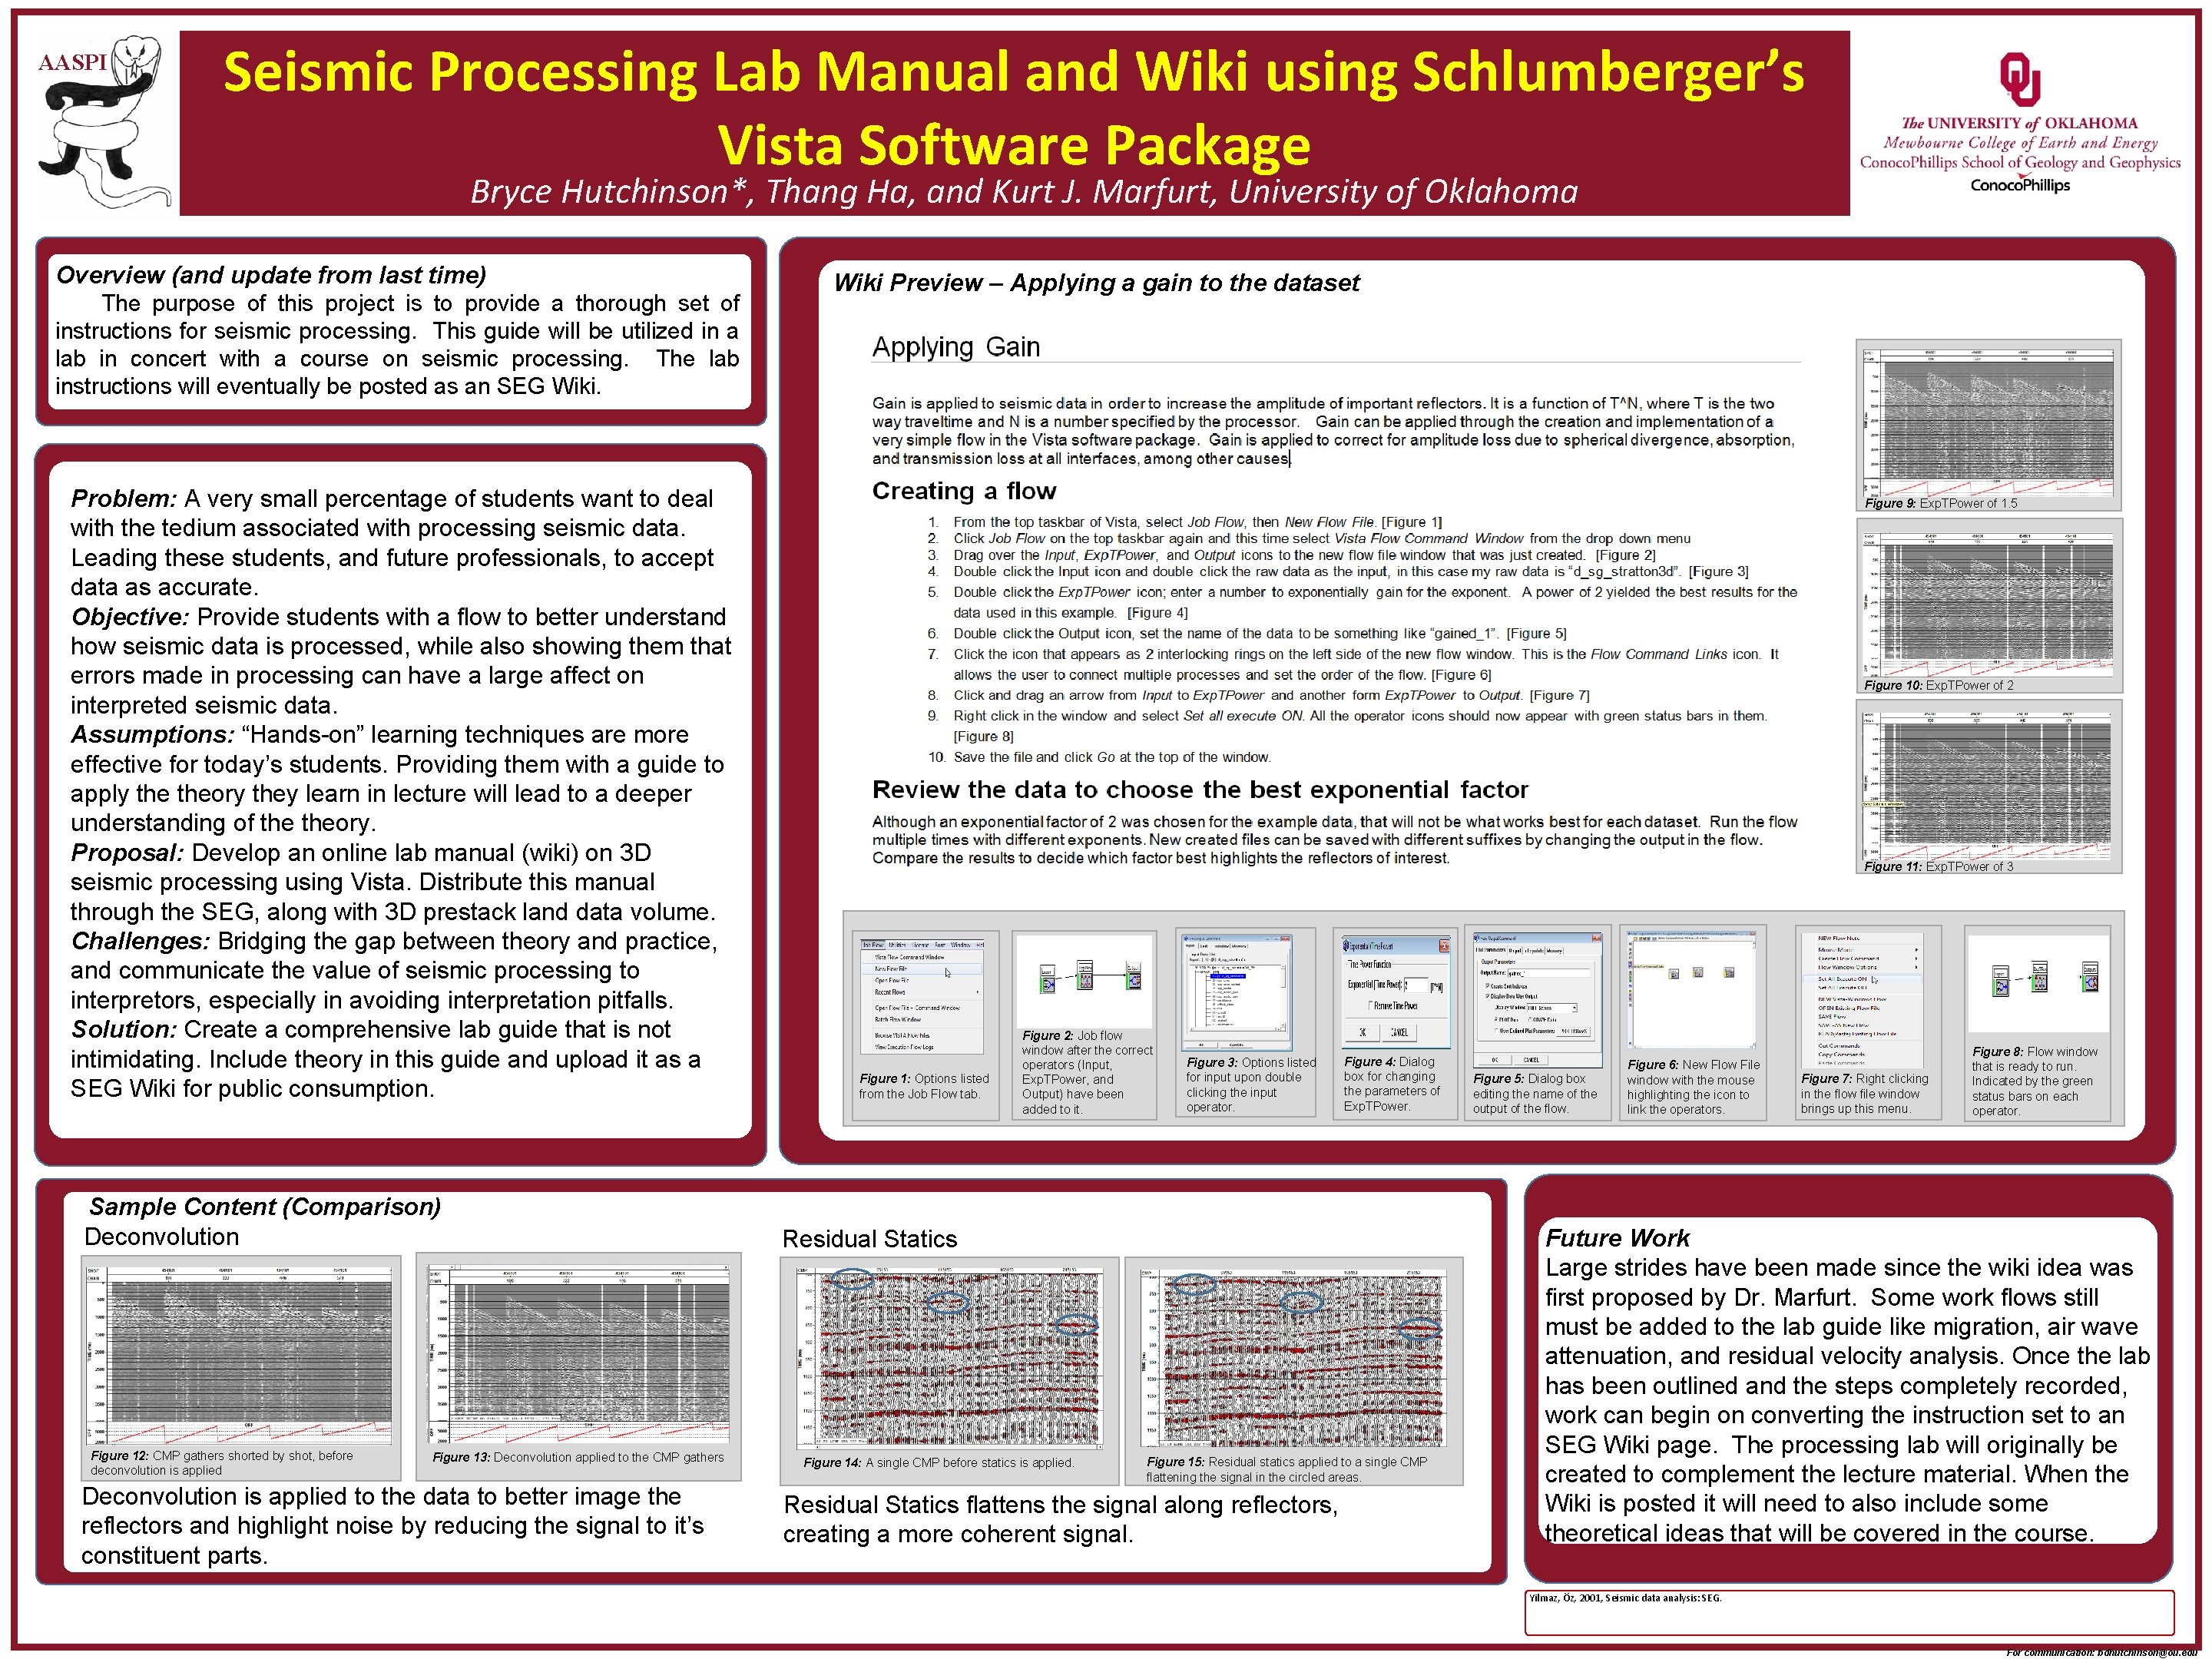 AASPI Seismic Processing Lab Manual and Wiki using Schlumberger’s Vista Software Package Bryce Hutchinson*,